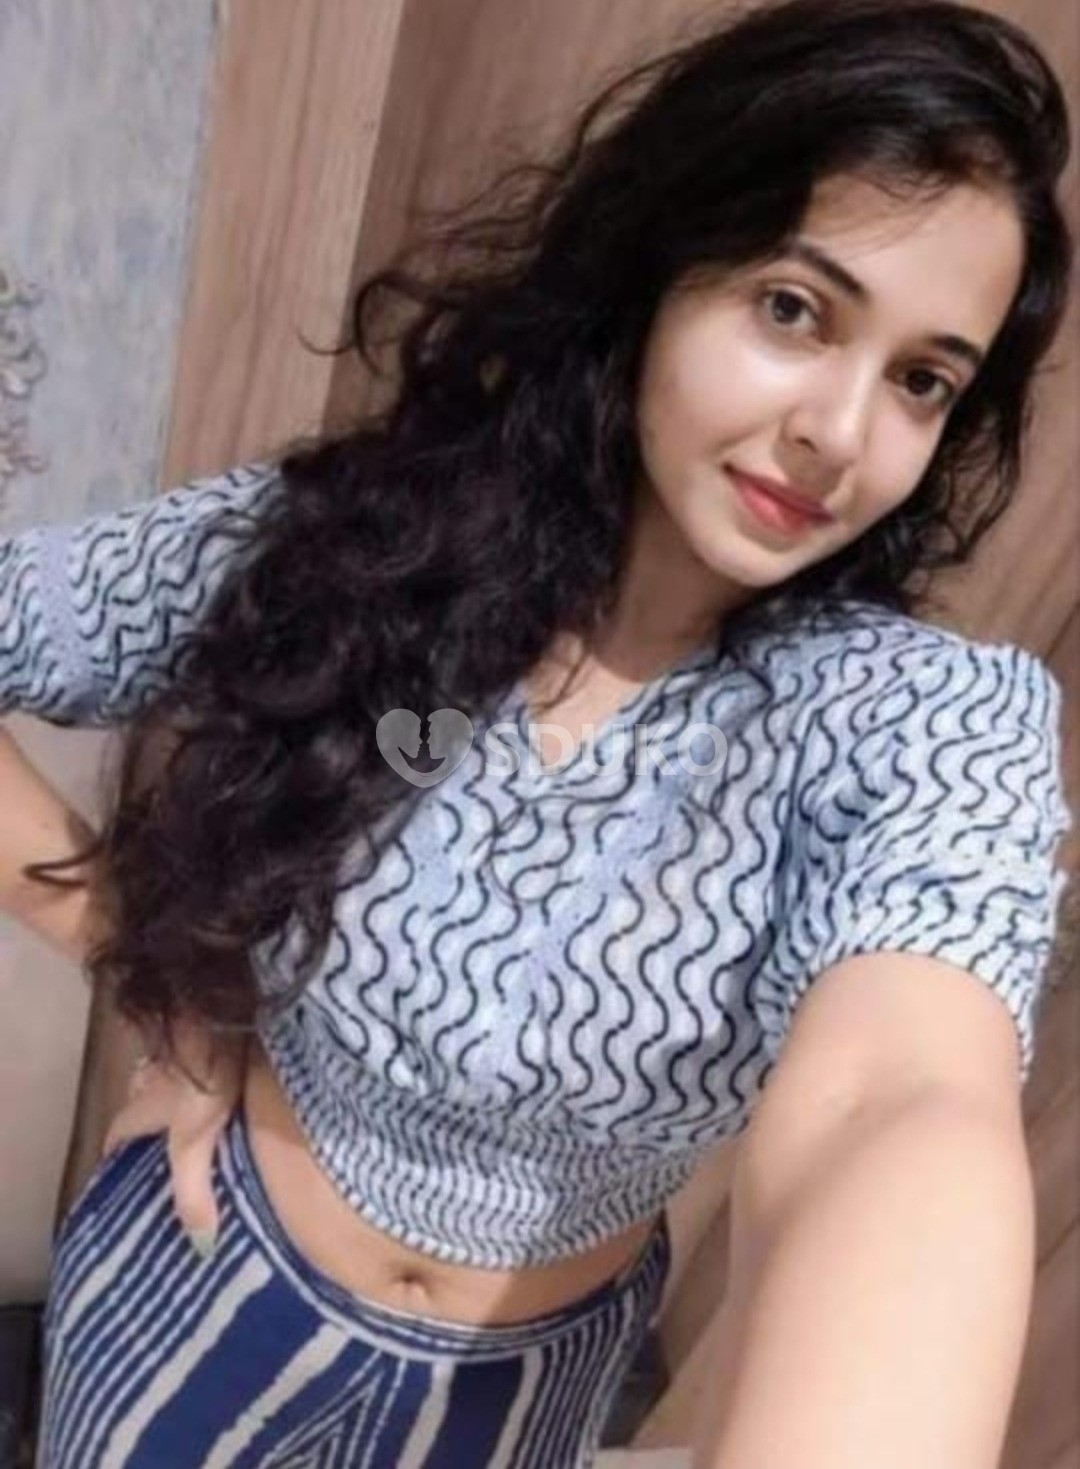 Ameerpet LOW PRICE🔸✅k ( 24×7 ) SERVICE A AVAILABLE 100% SAFE AND S SECURE UNLIMITED ENJOY HOT COLLEGE GIRL HOUSEWI